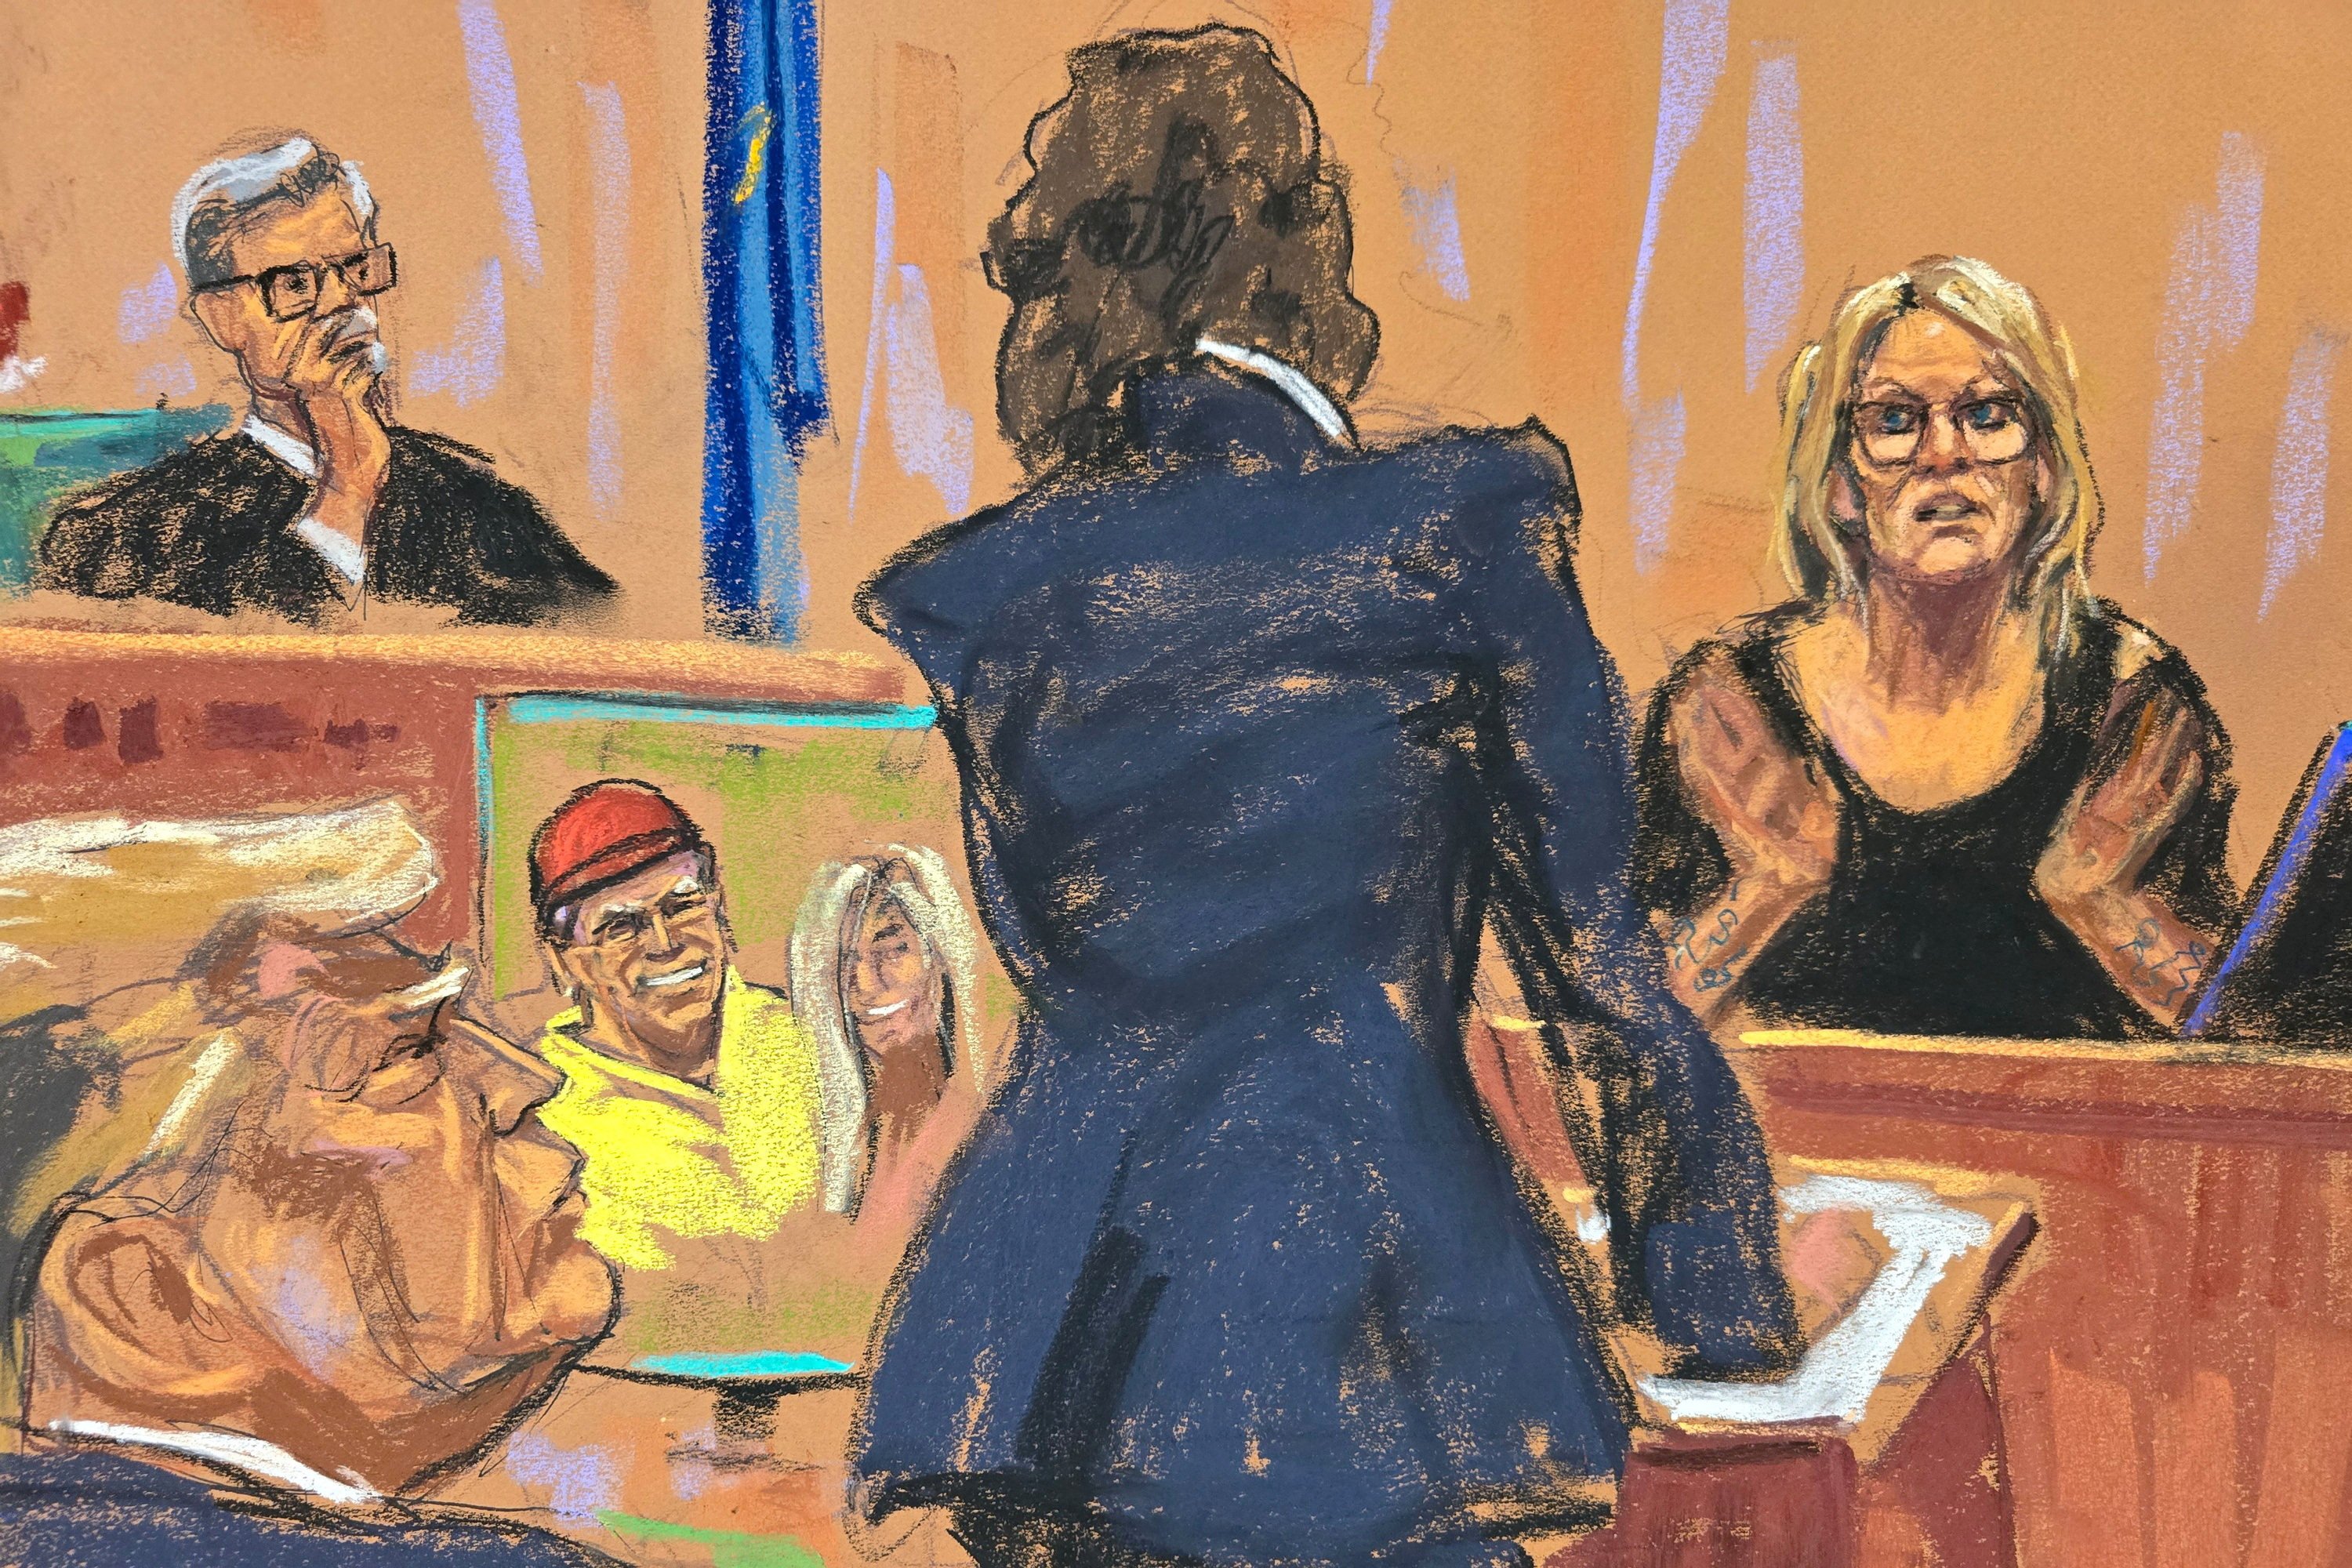 Stormy Daniels is questioned by prosecutor Susan Hoffinger during Donald Trump’s trial in New York on Tuesday. Courtroom sketch: Jane Rosenberg via Reuters